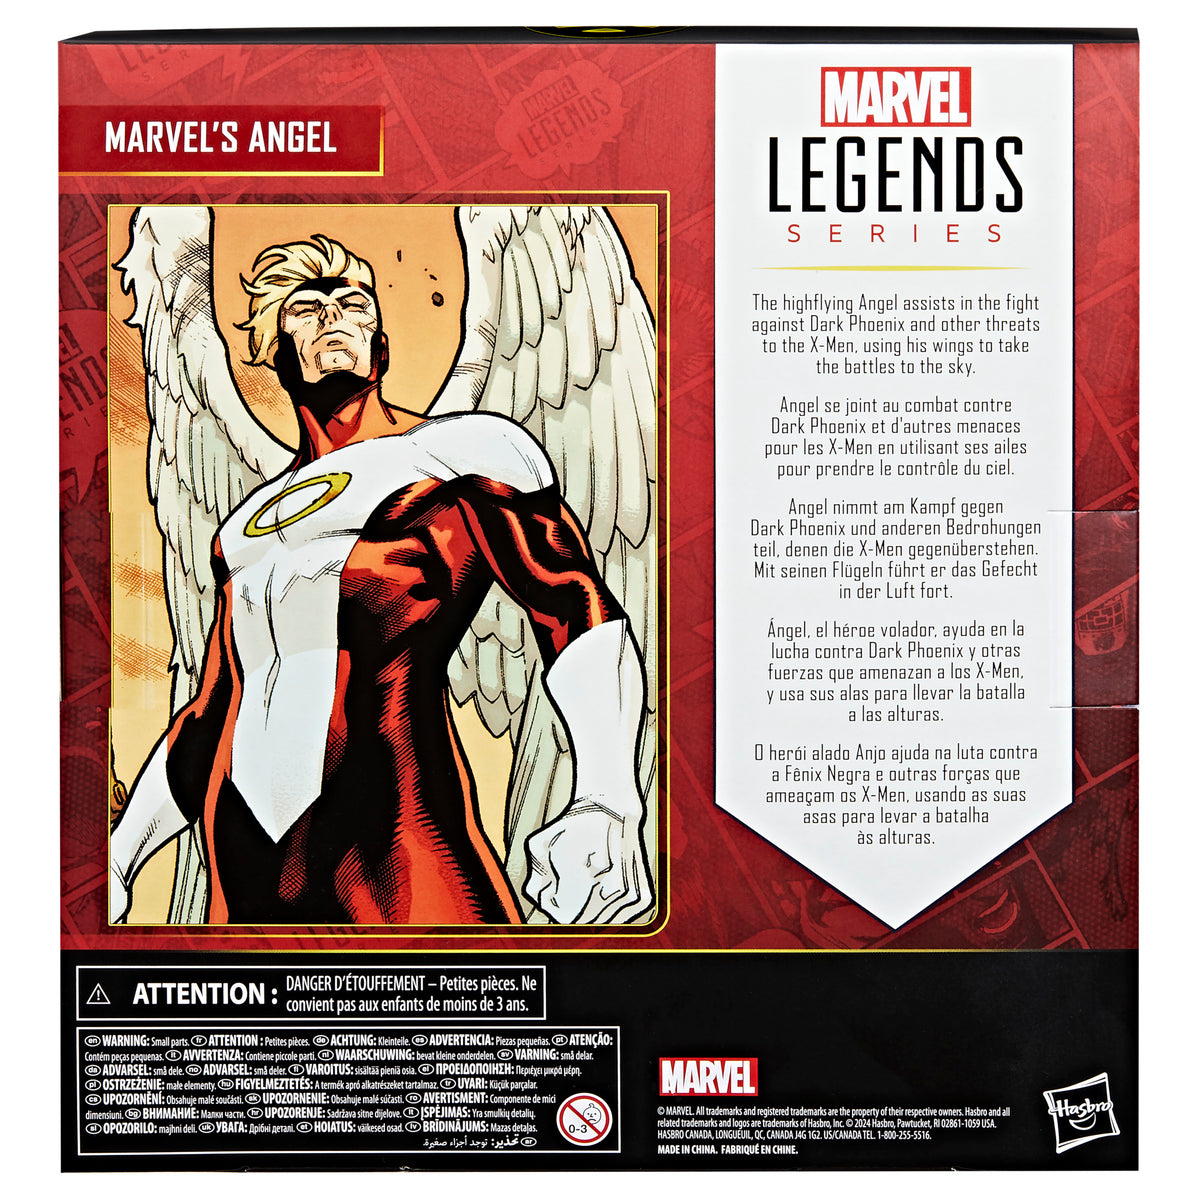 Marvel Legends Hasbro 10/27 and London Comic Con Pre-Order Details